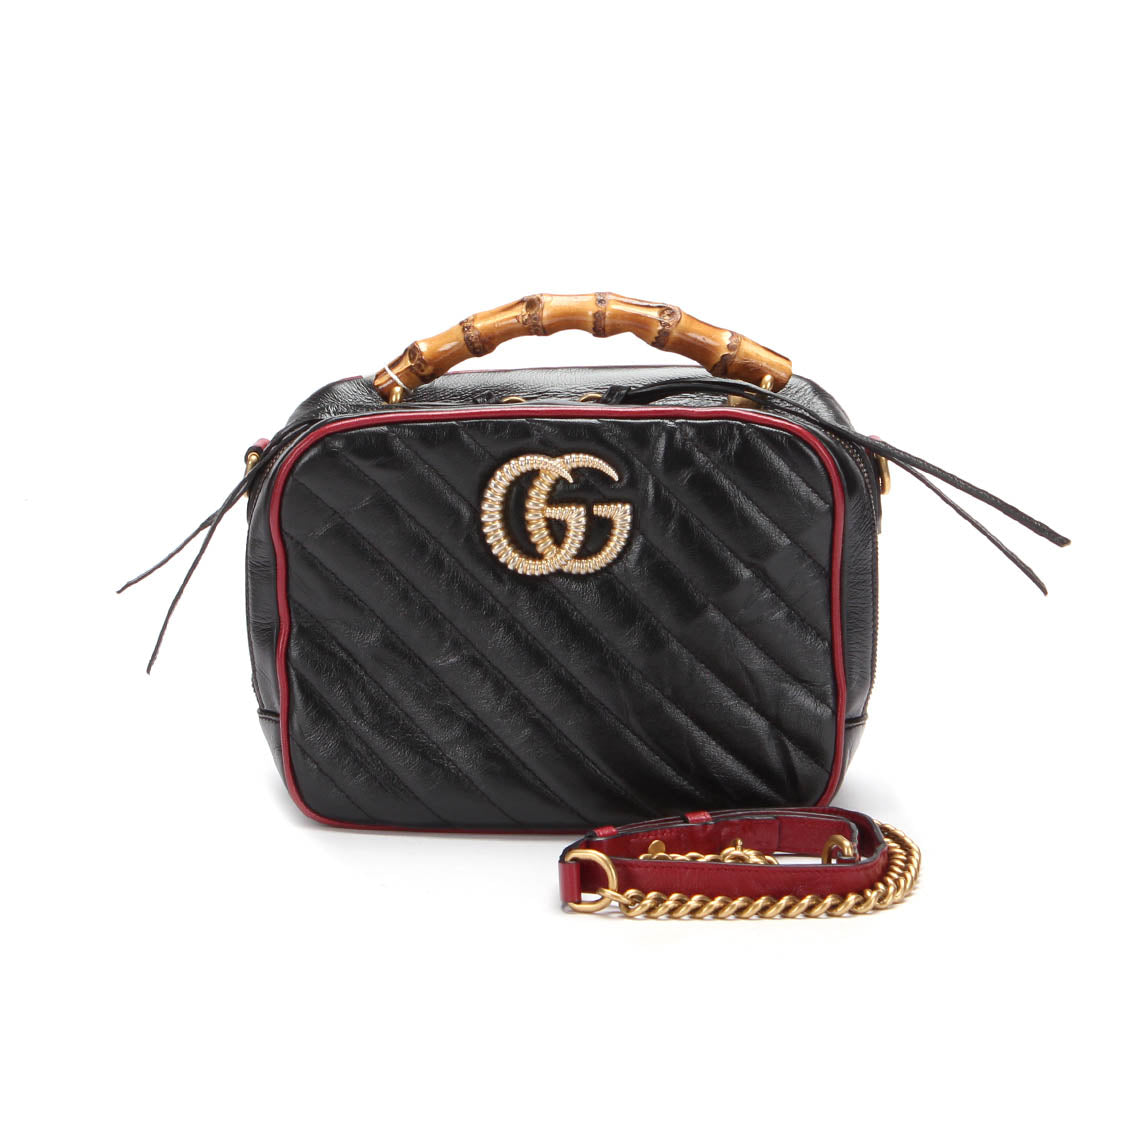 GG Marmont Bamboo Leather Shoulder Bag 602270